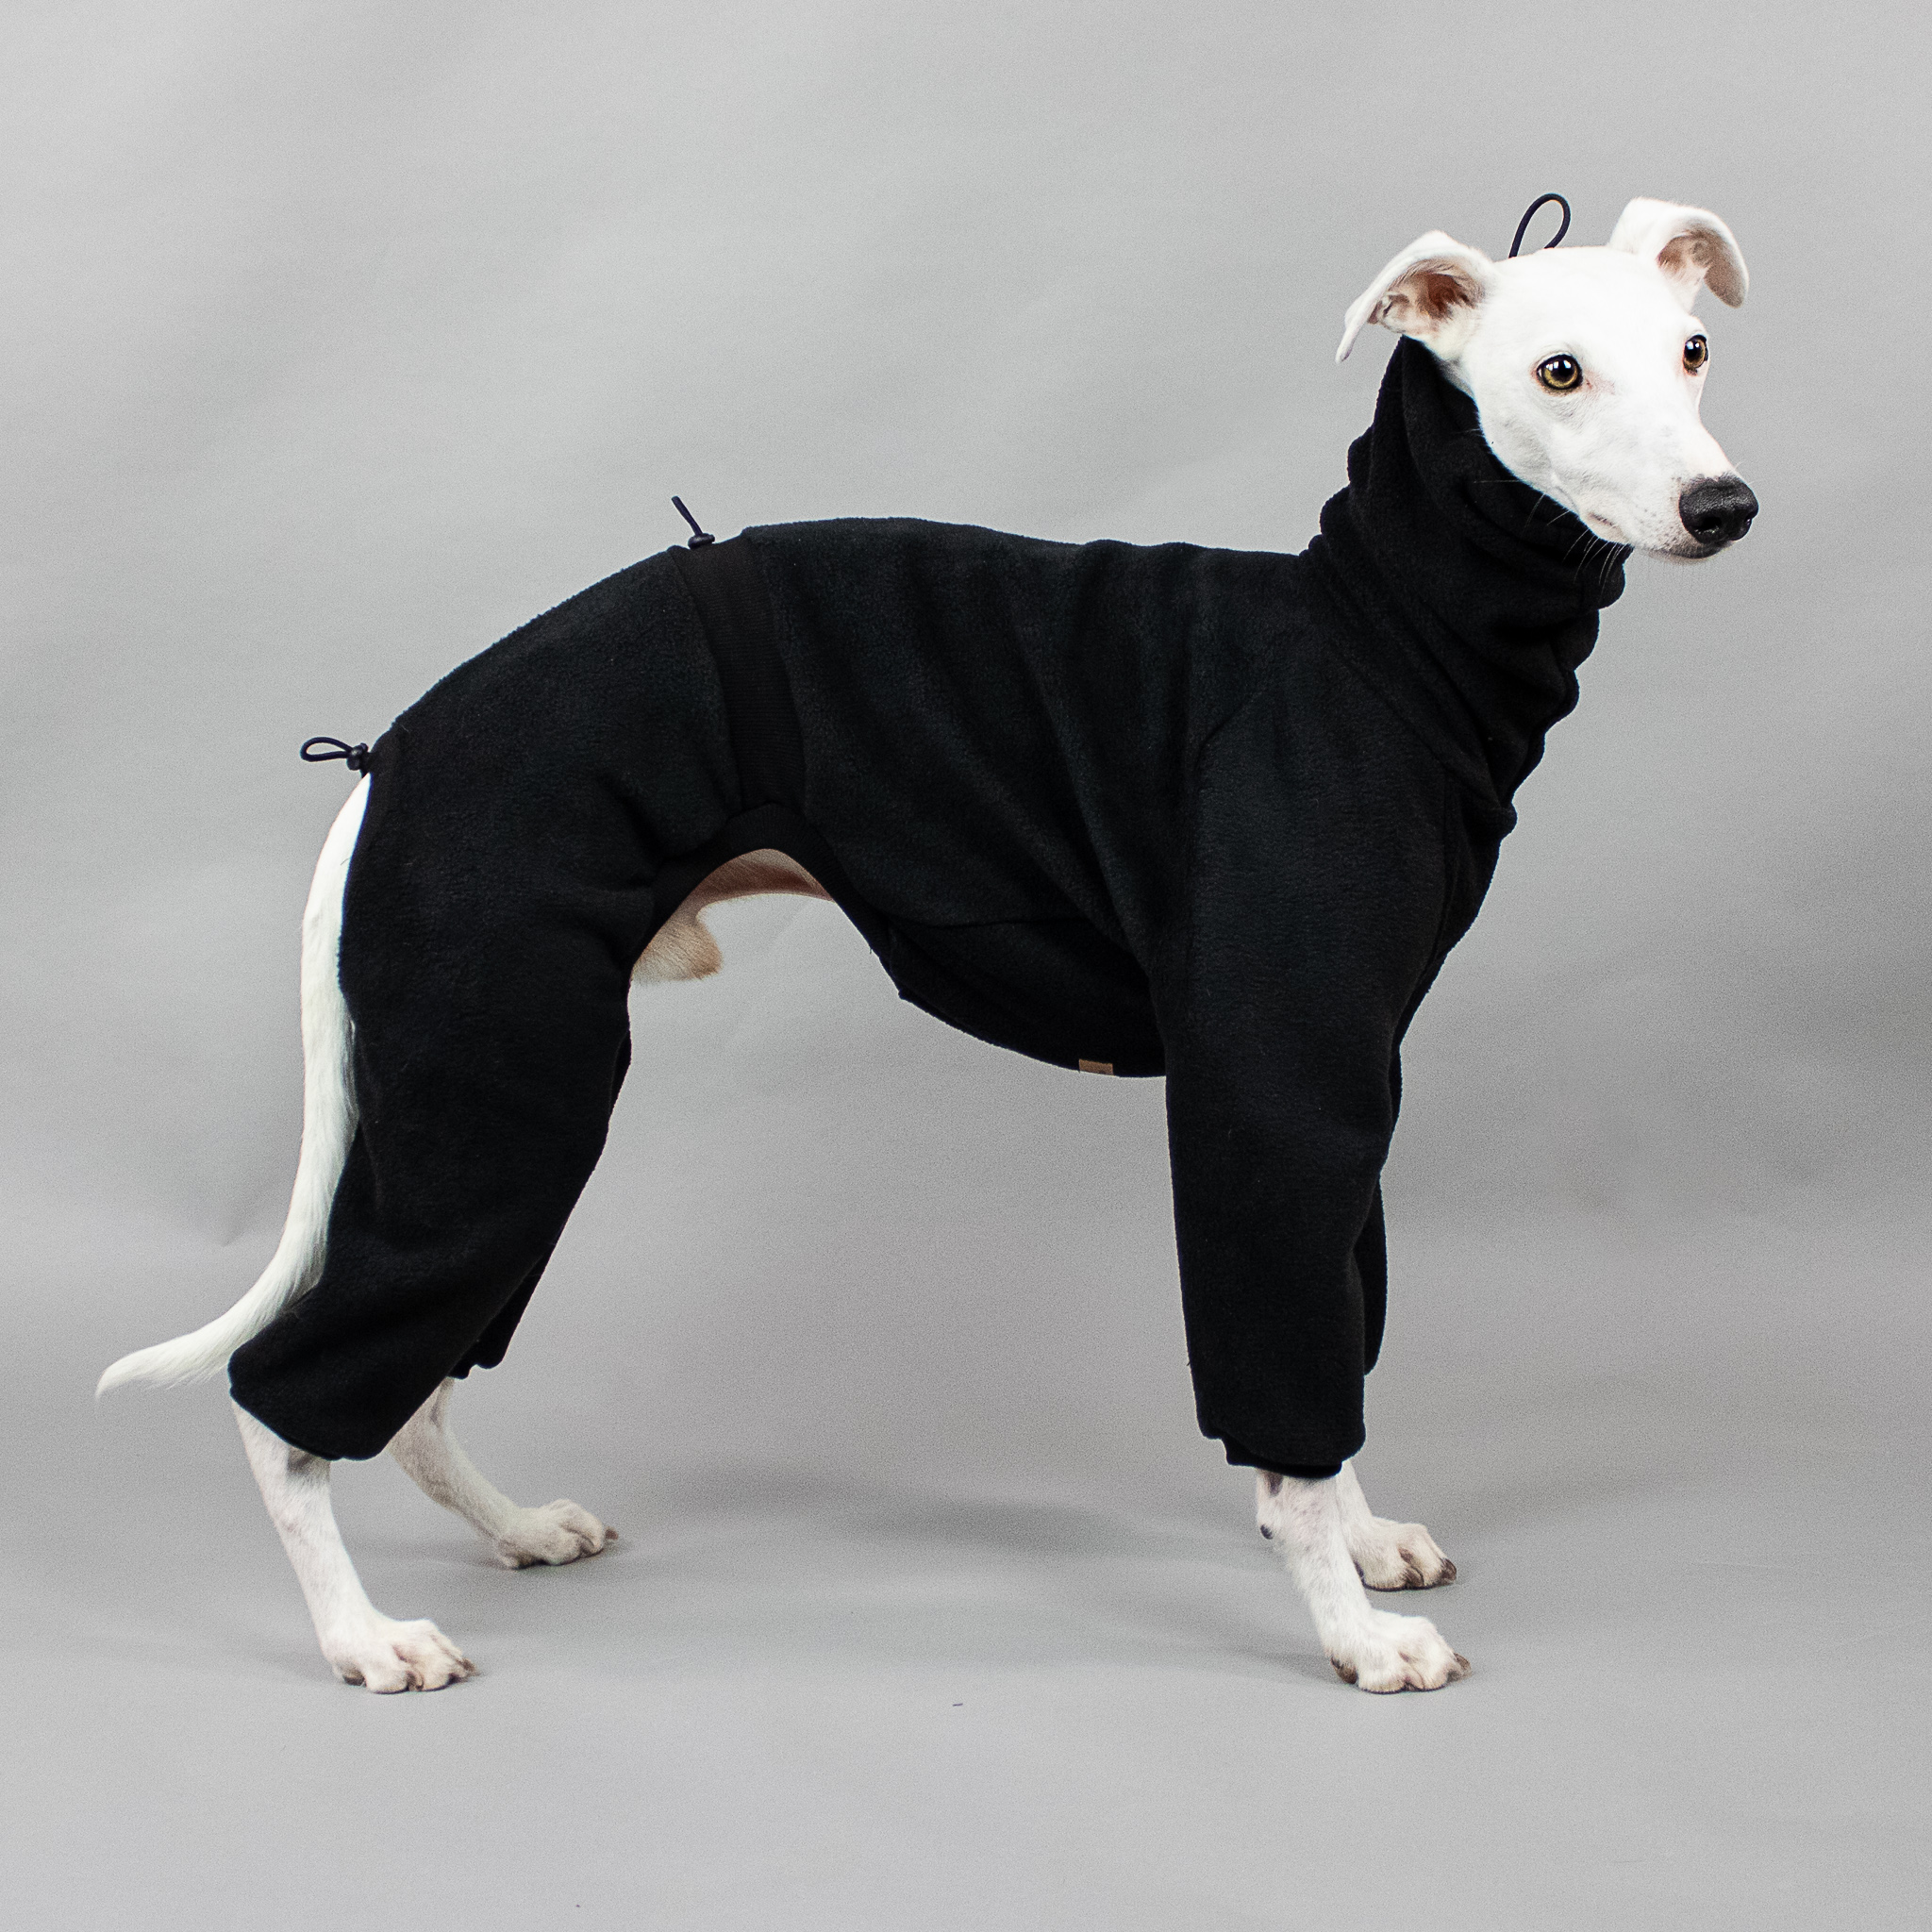 Whippet - Overall